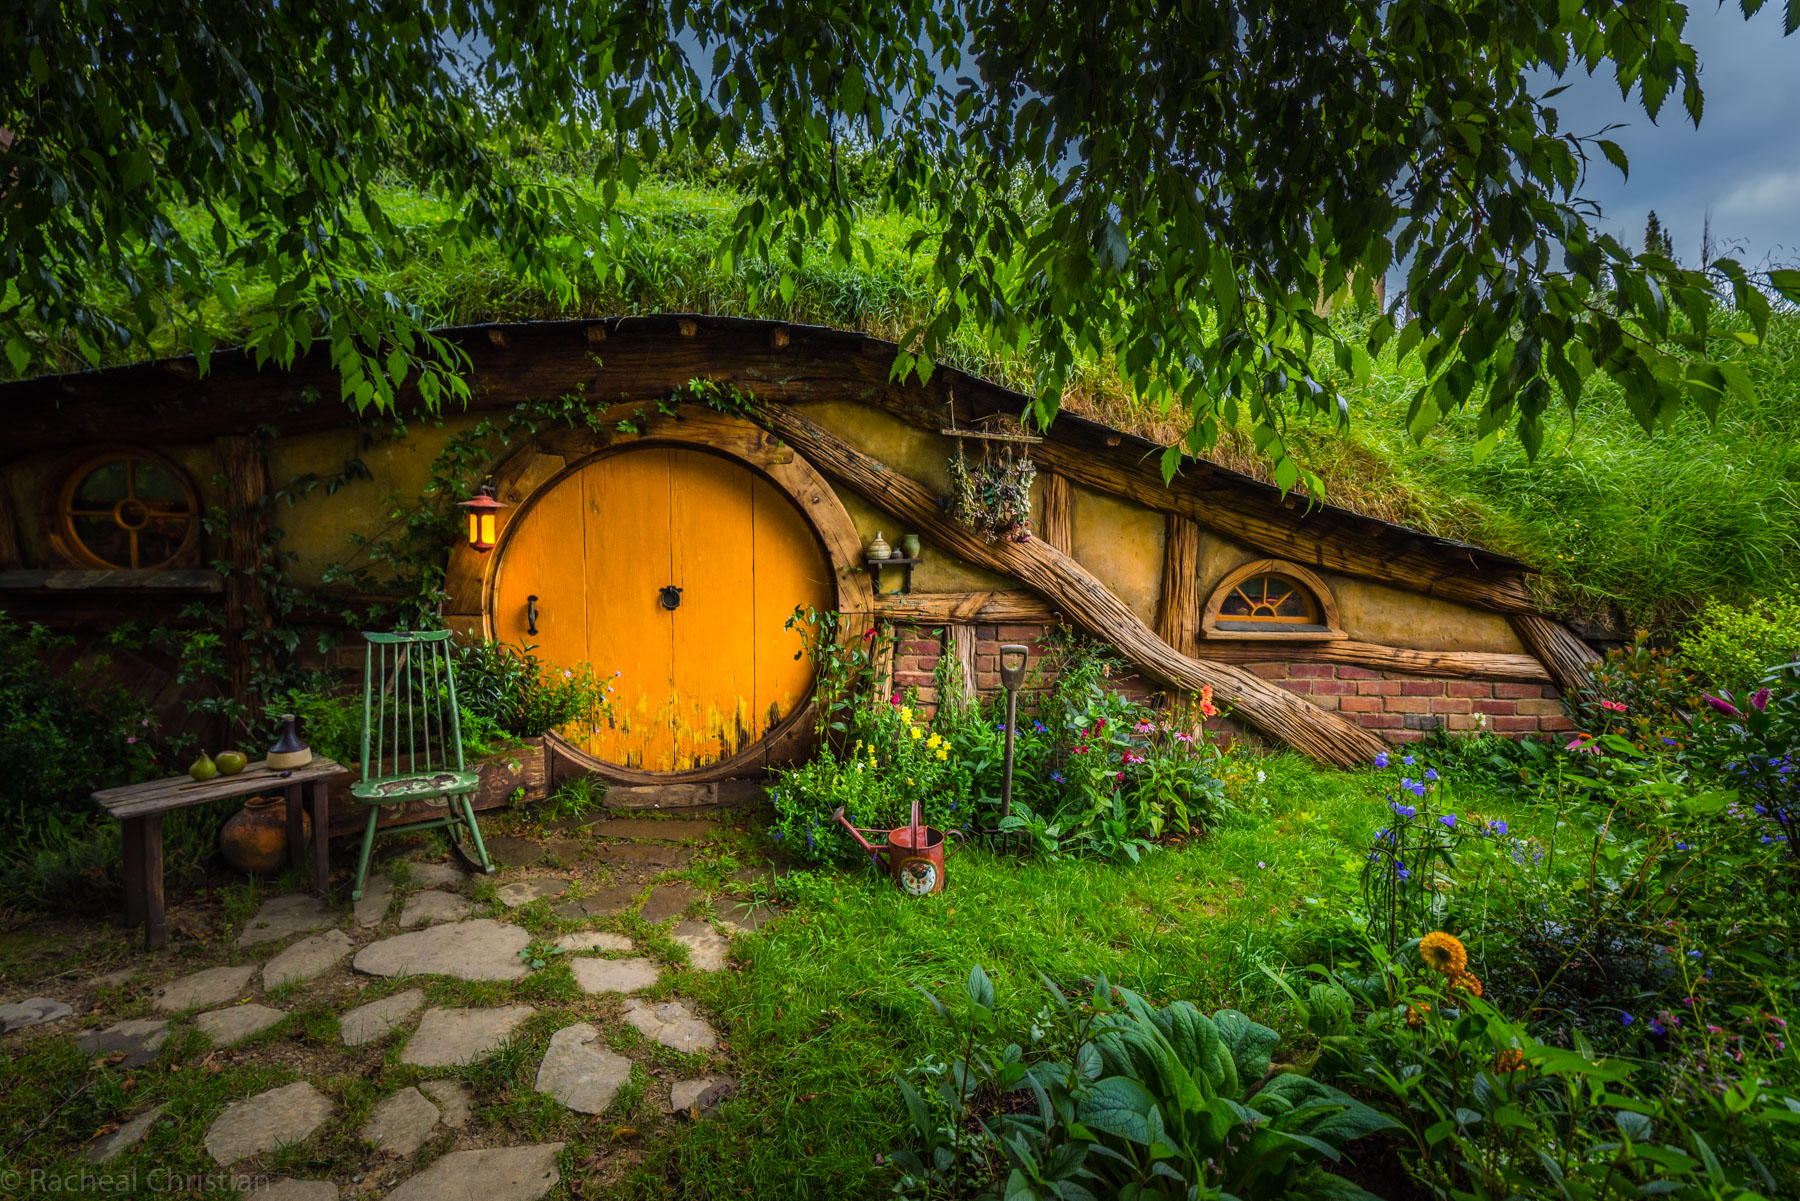 The Hobbiton Movie Set - Lord Of The Rings - Photography Racheal Christian 3